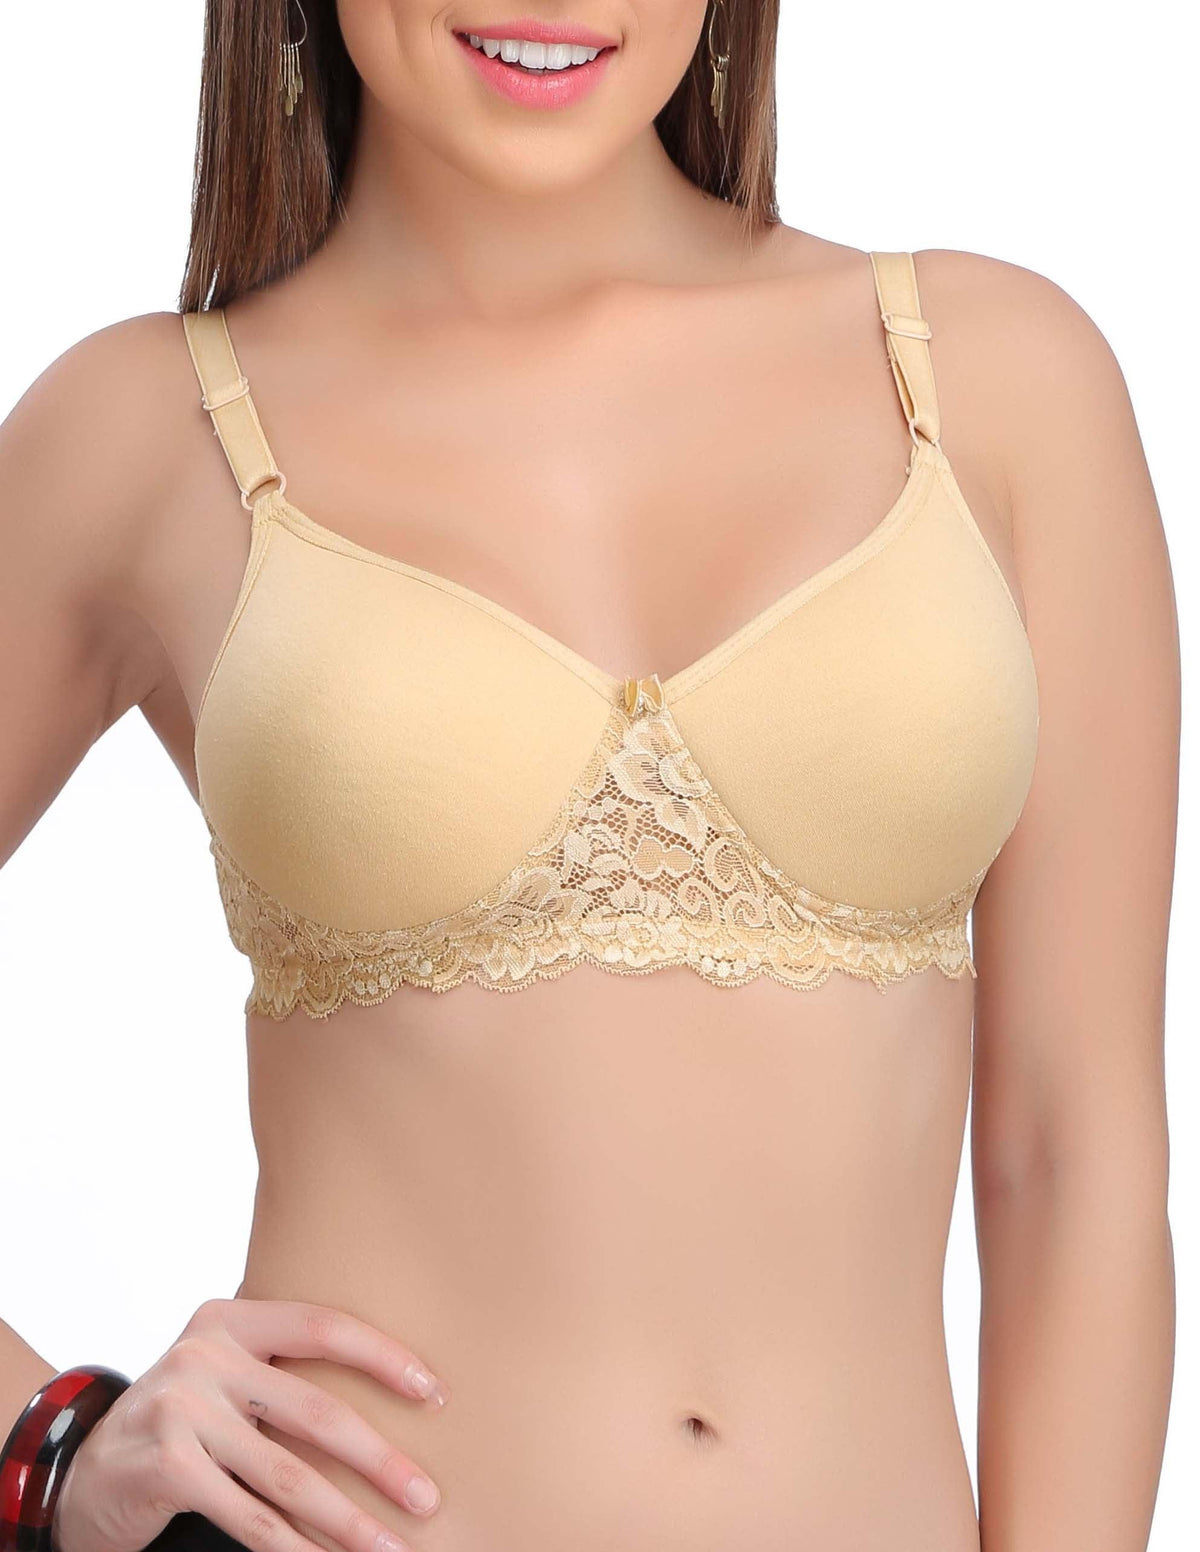 Eve's Beauty: Seamless Padded Bras for Effortless Comfort and